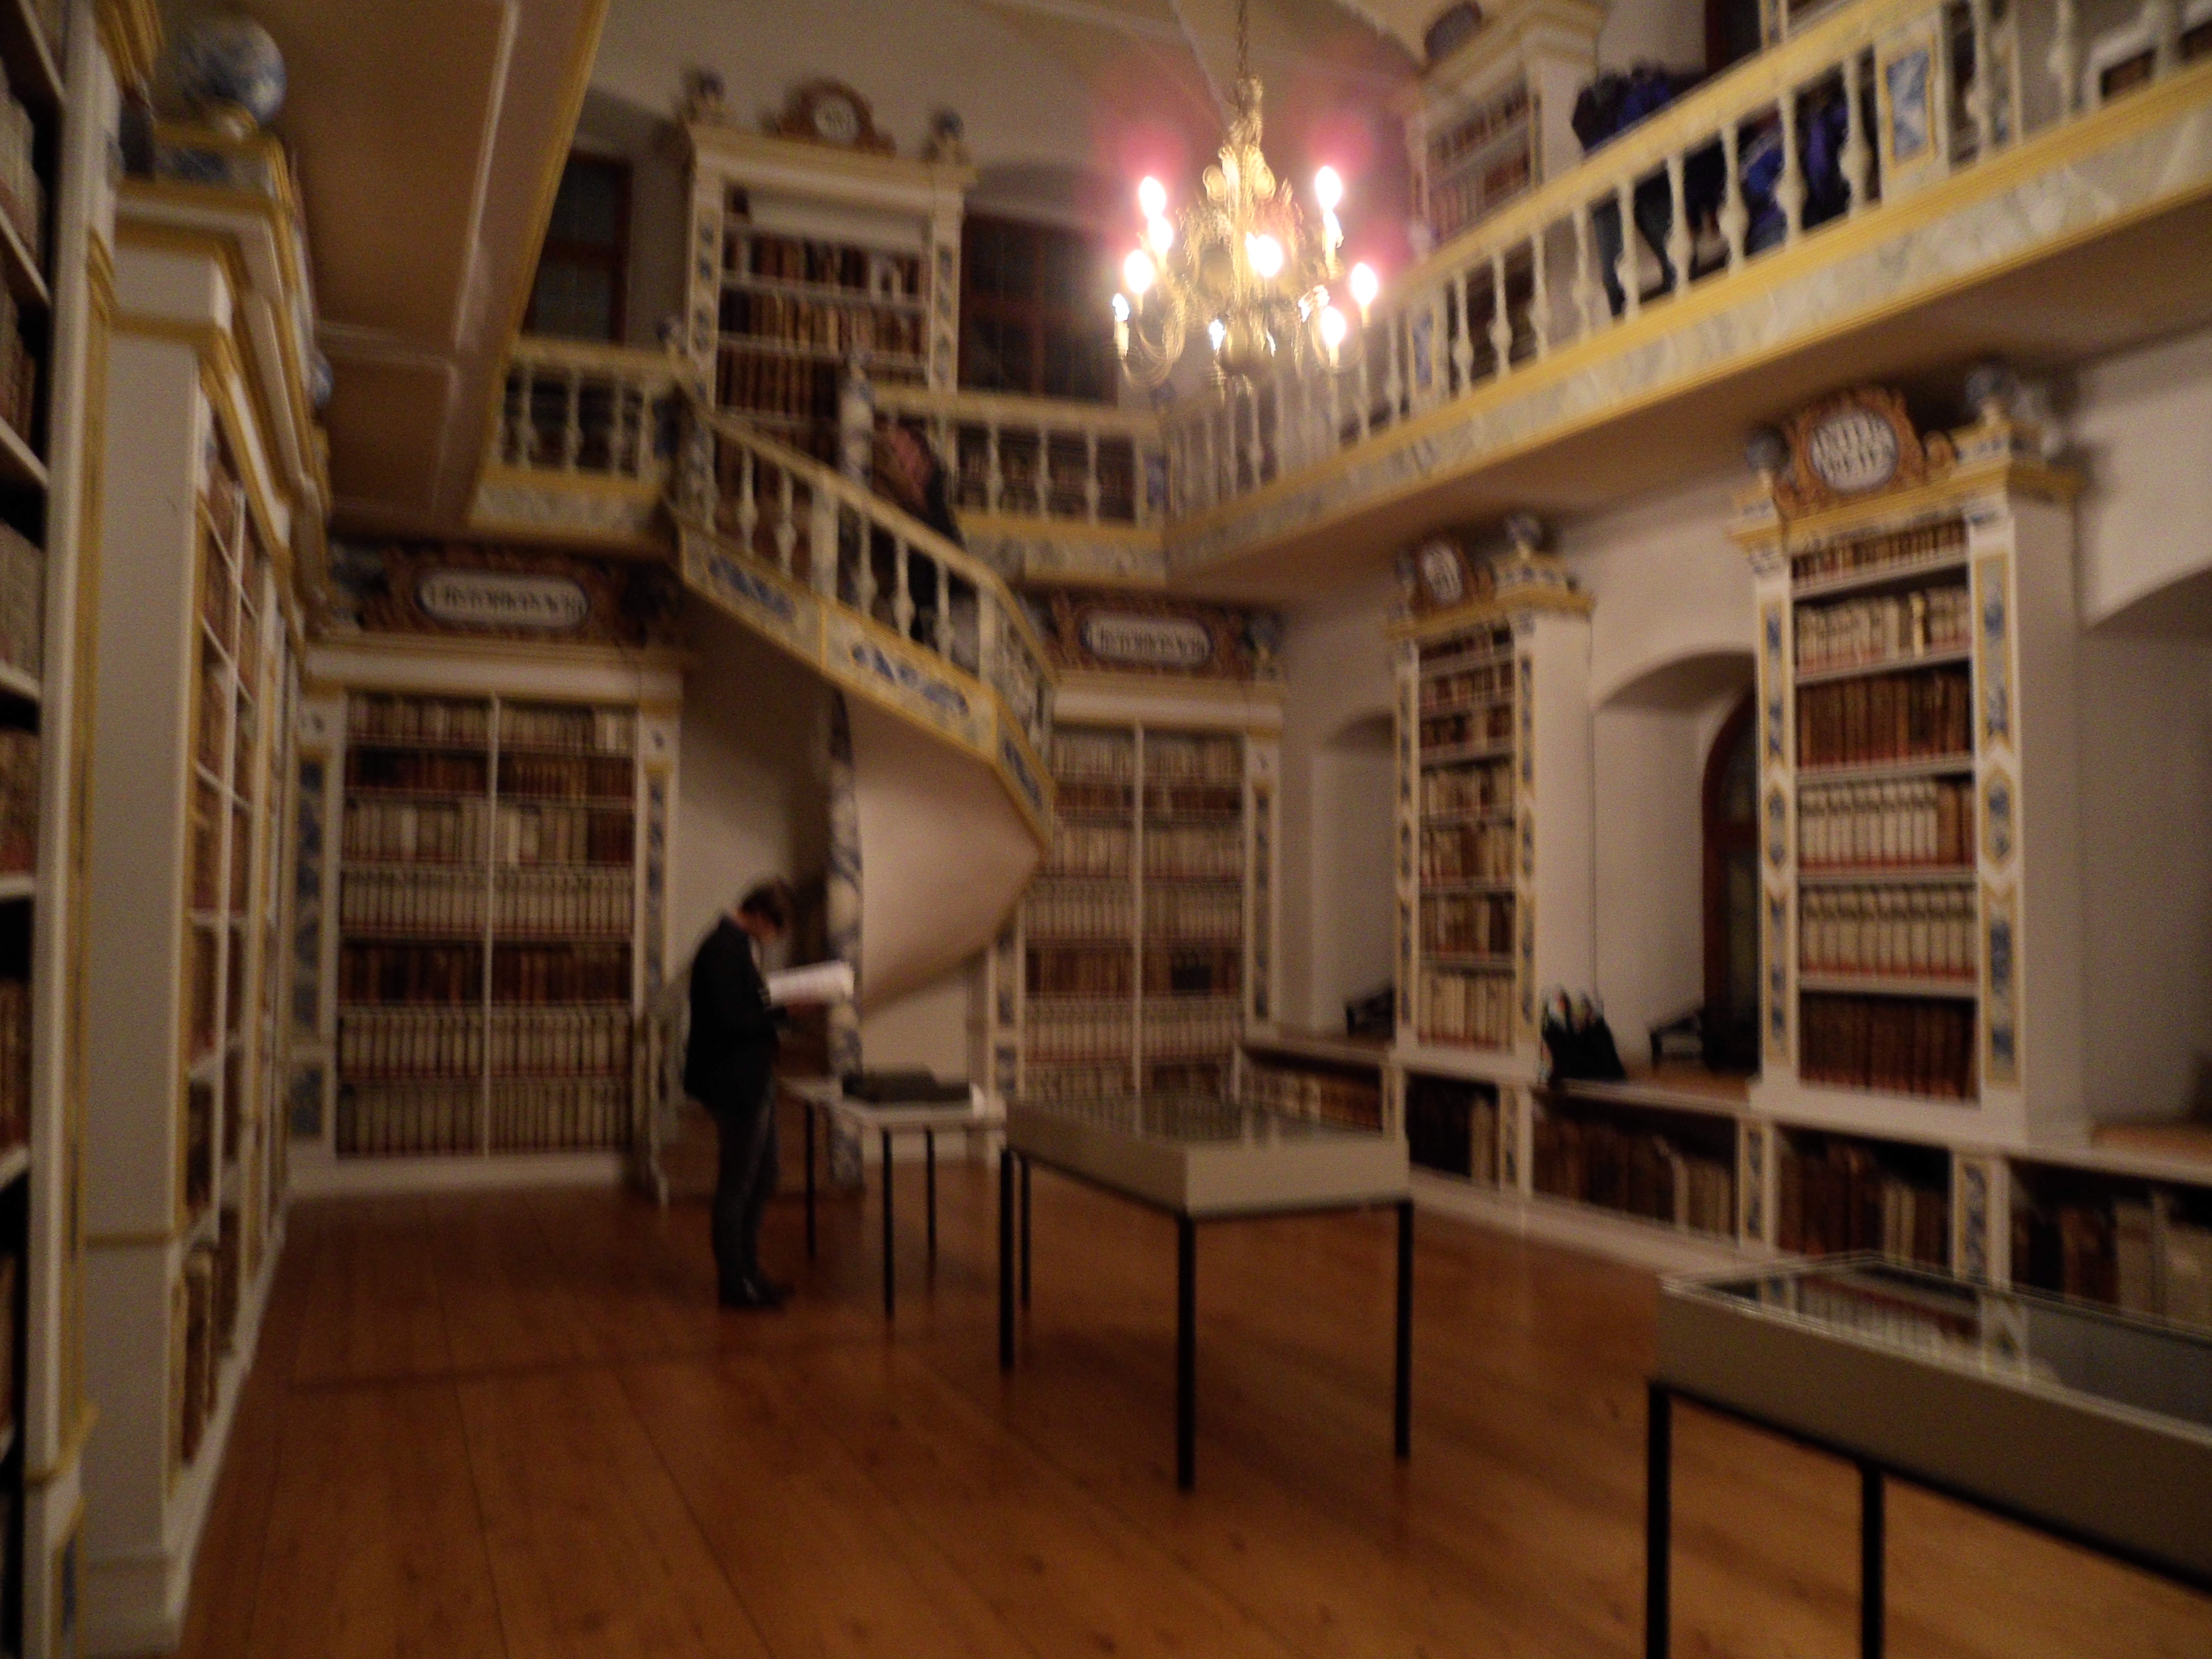 A large hall with glass windows, bookshelves between them, and a balcony encircling the room accessed by a spiral staircase